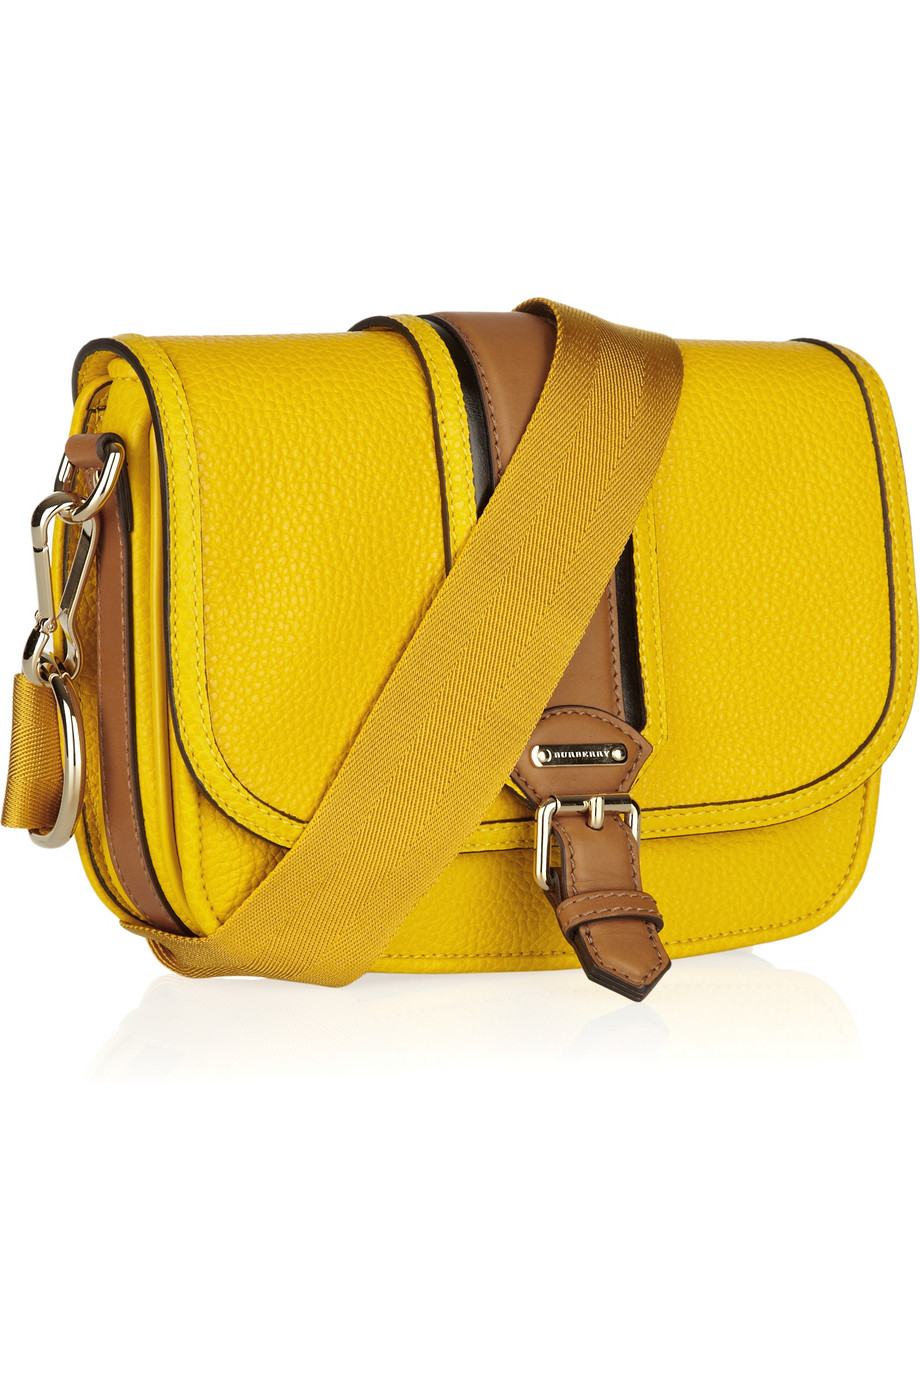 Burberry Textured-leather Crossbody Bag in Mustard (Yellow) - Lyst